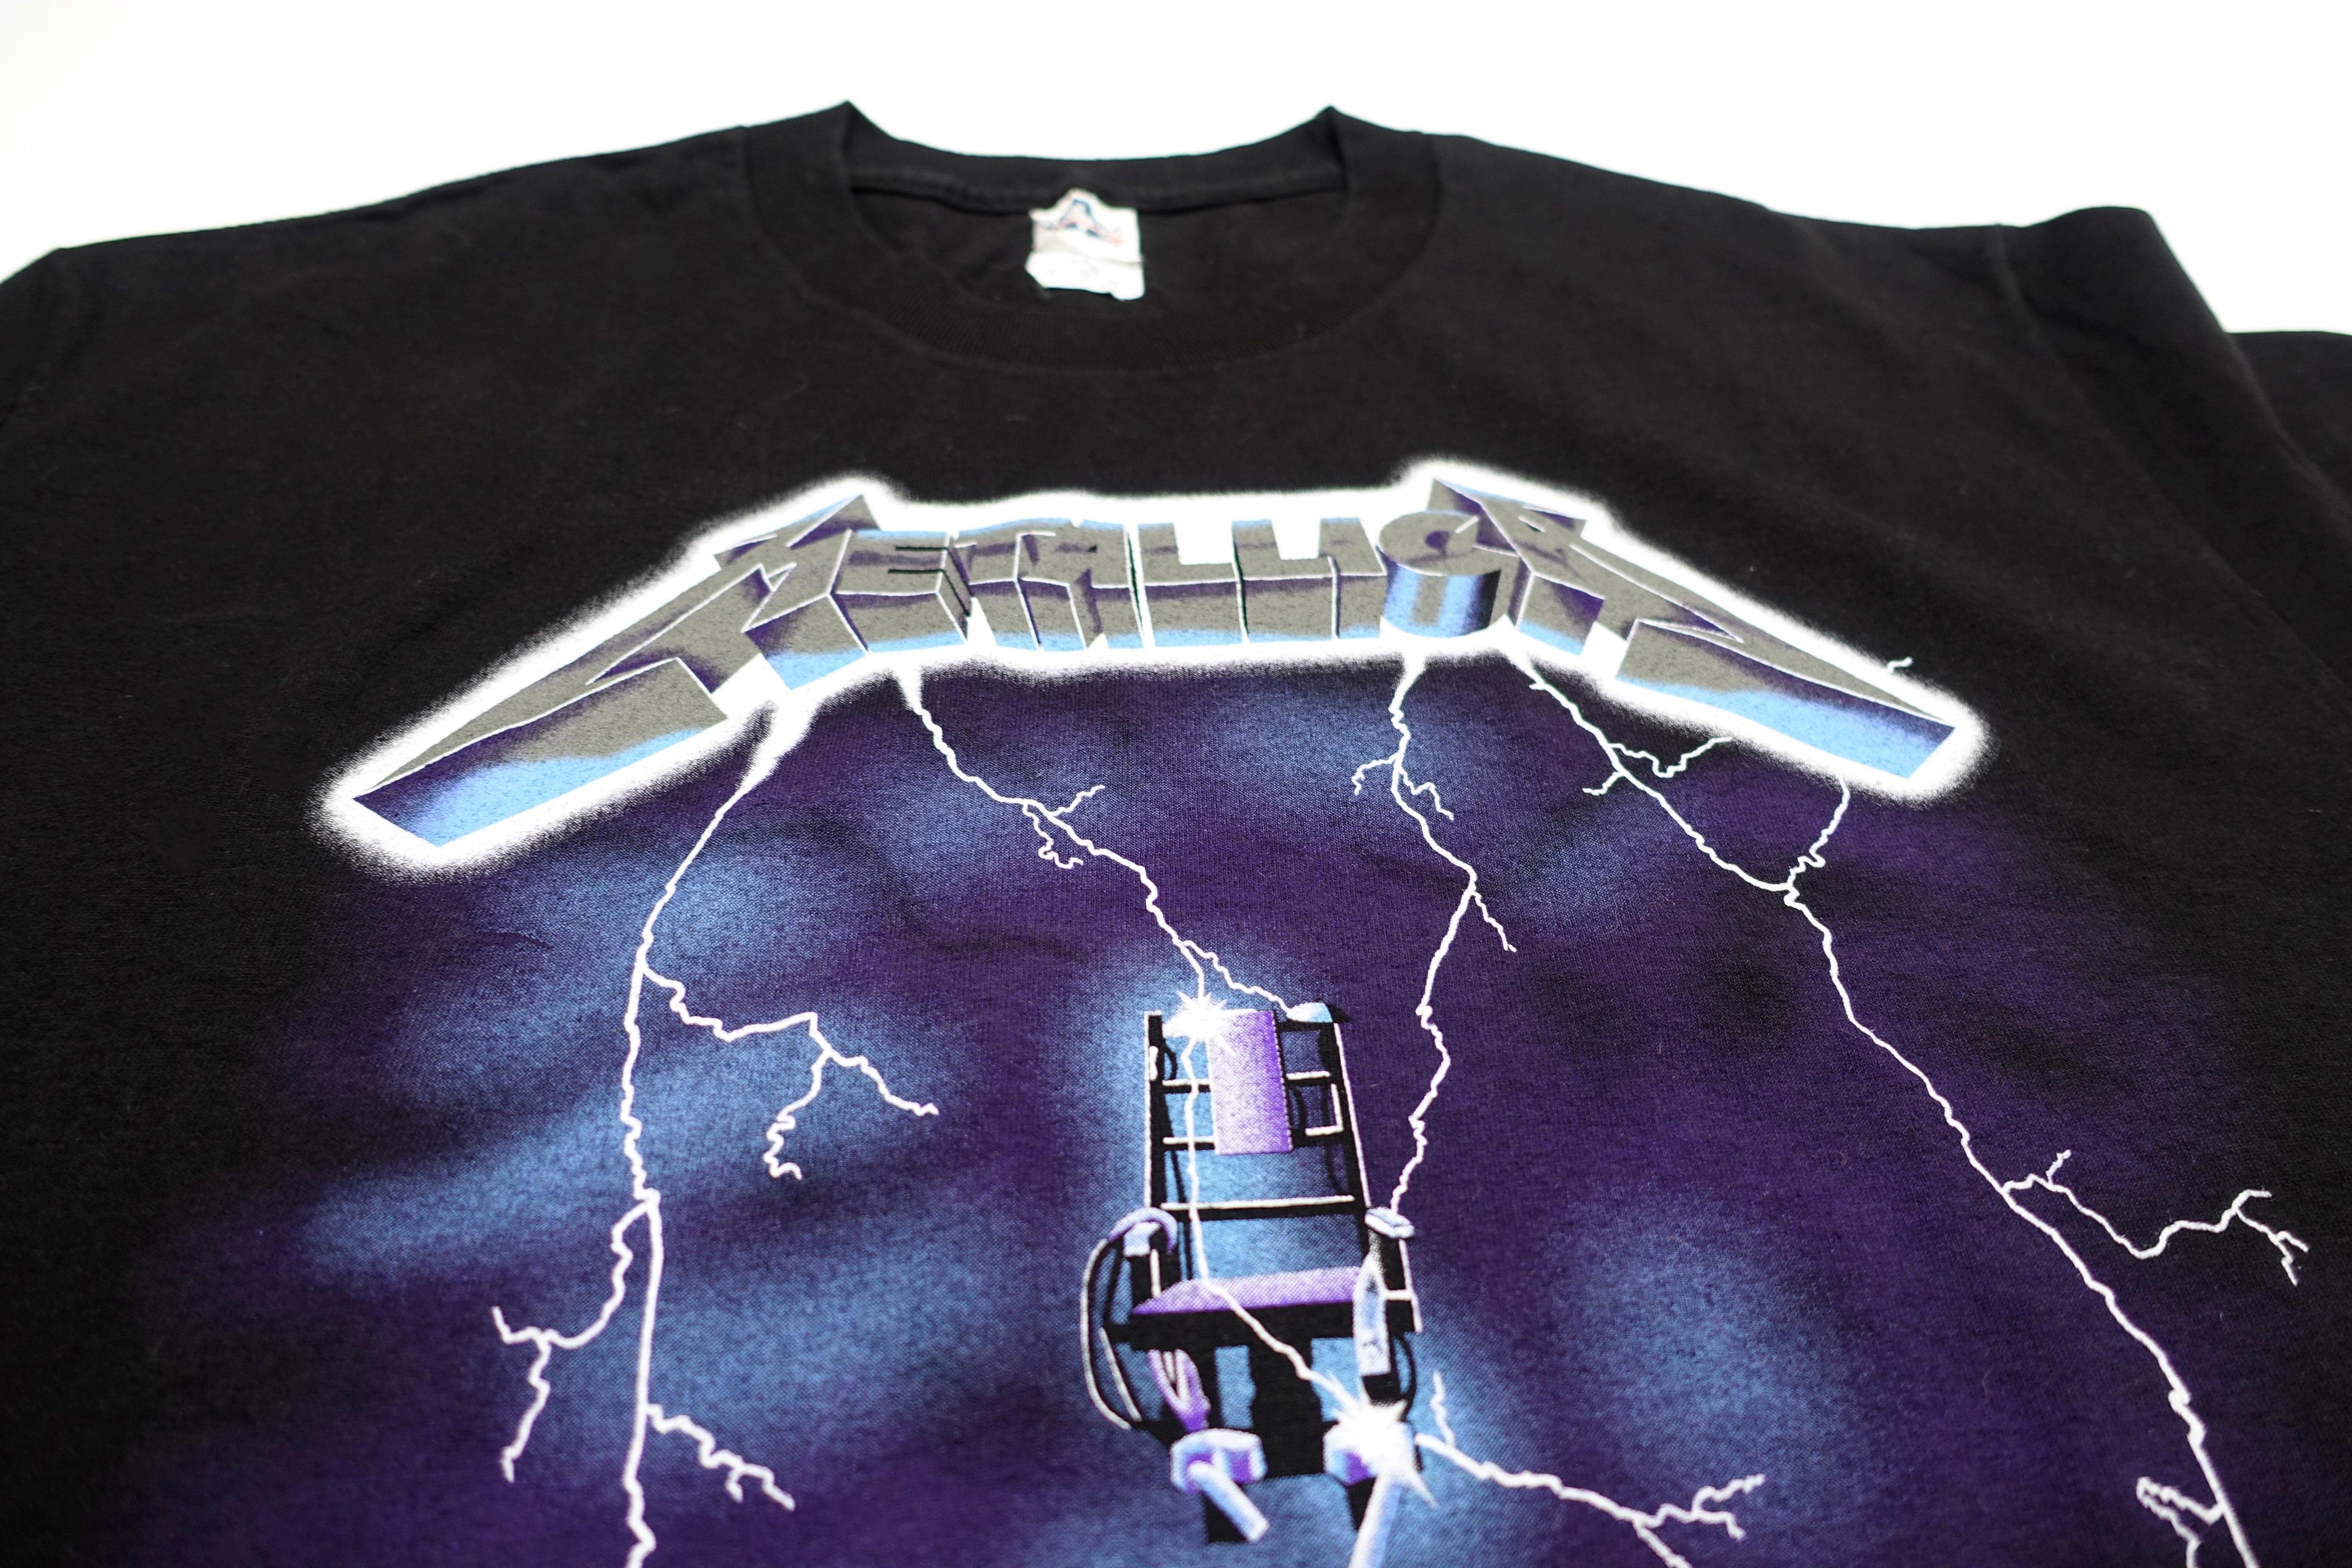 Metallica - Ride The Lightning 2007 Issue Tour Shirt Size Large